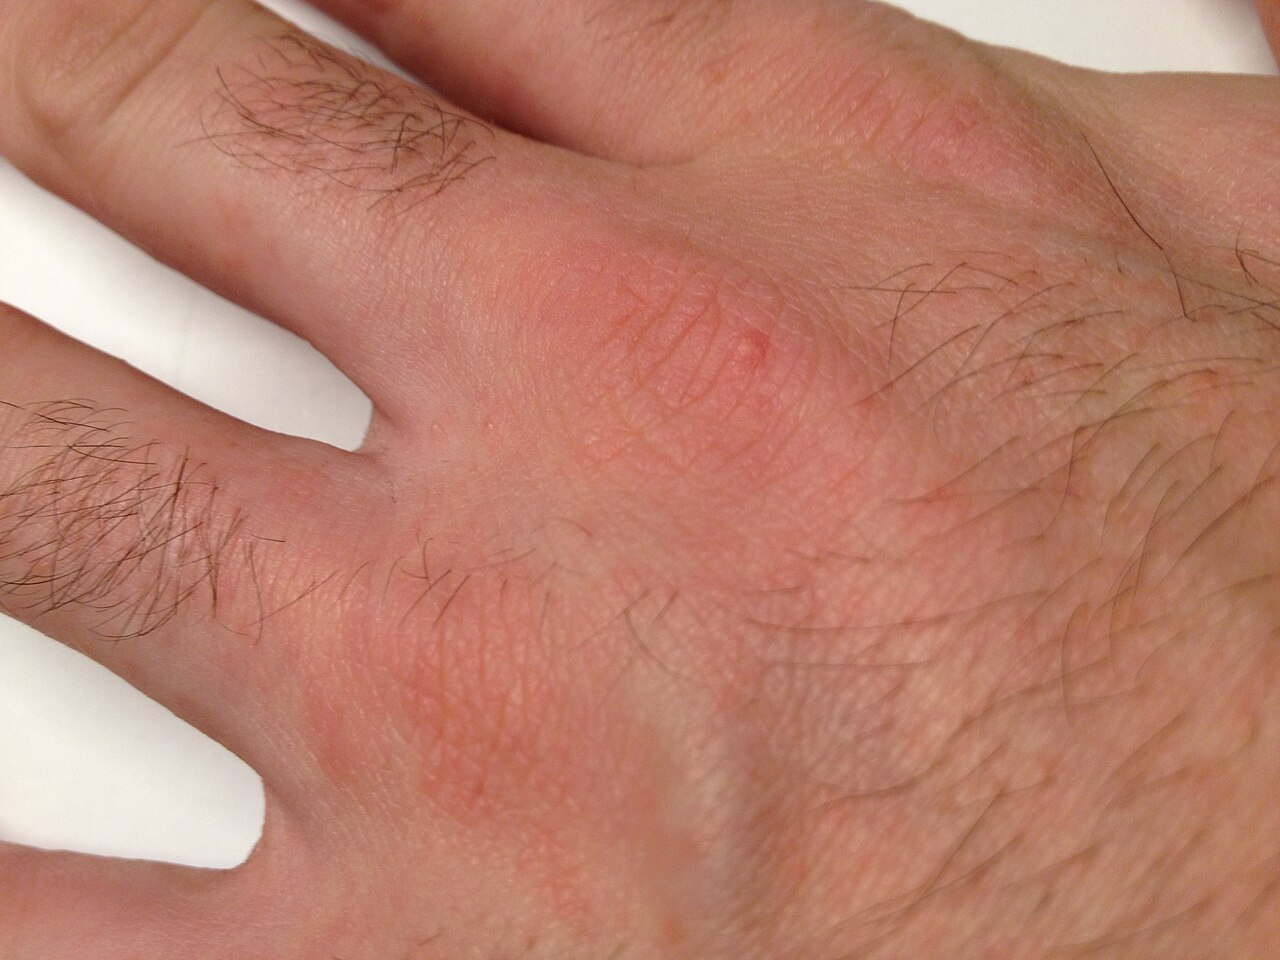 Scabies | American Academy of Dermatology